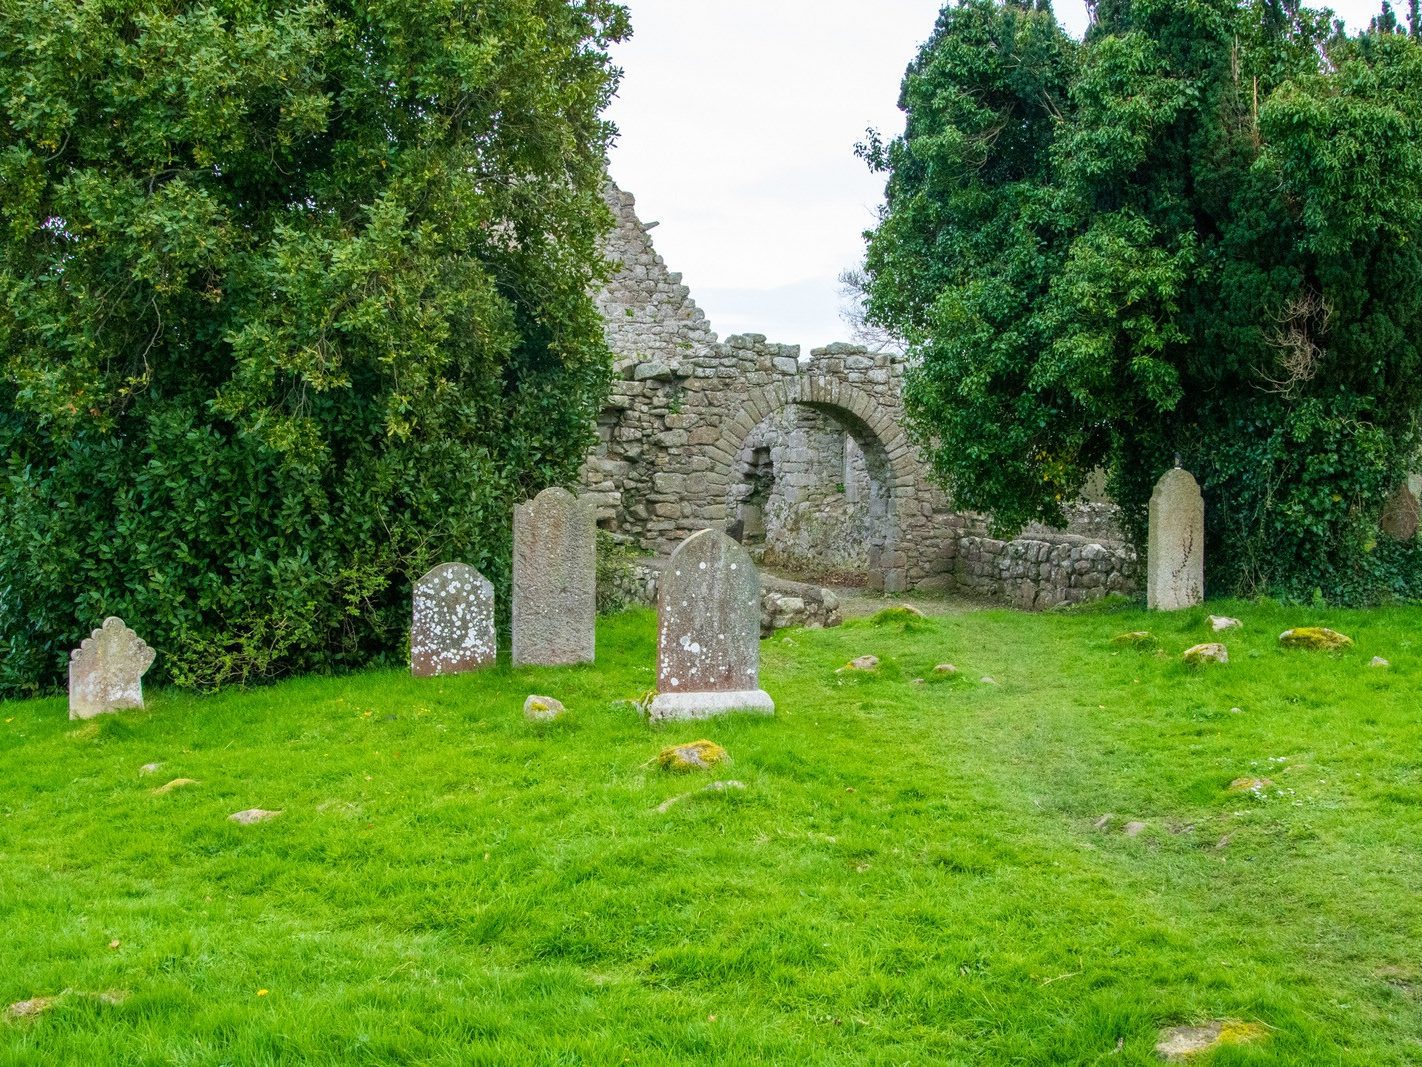 TWO CROSSES AND TULLY CHURCH AT LAUGHANSOWN LANE [THE CHURCH AND GRAVES]-223543-1